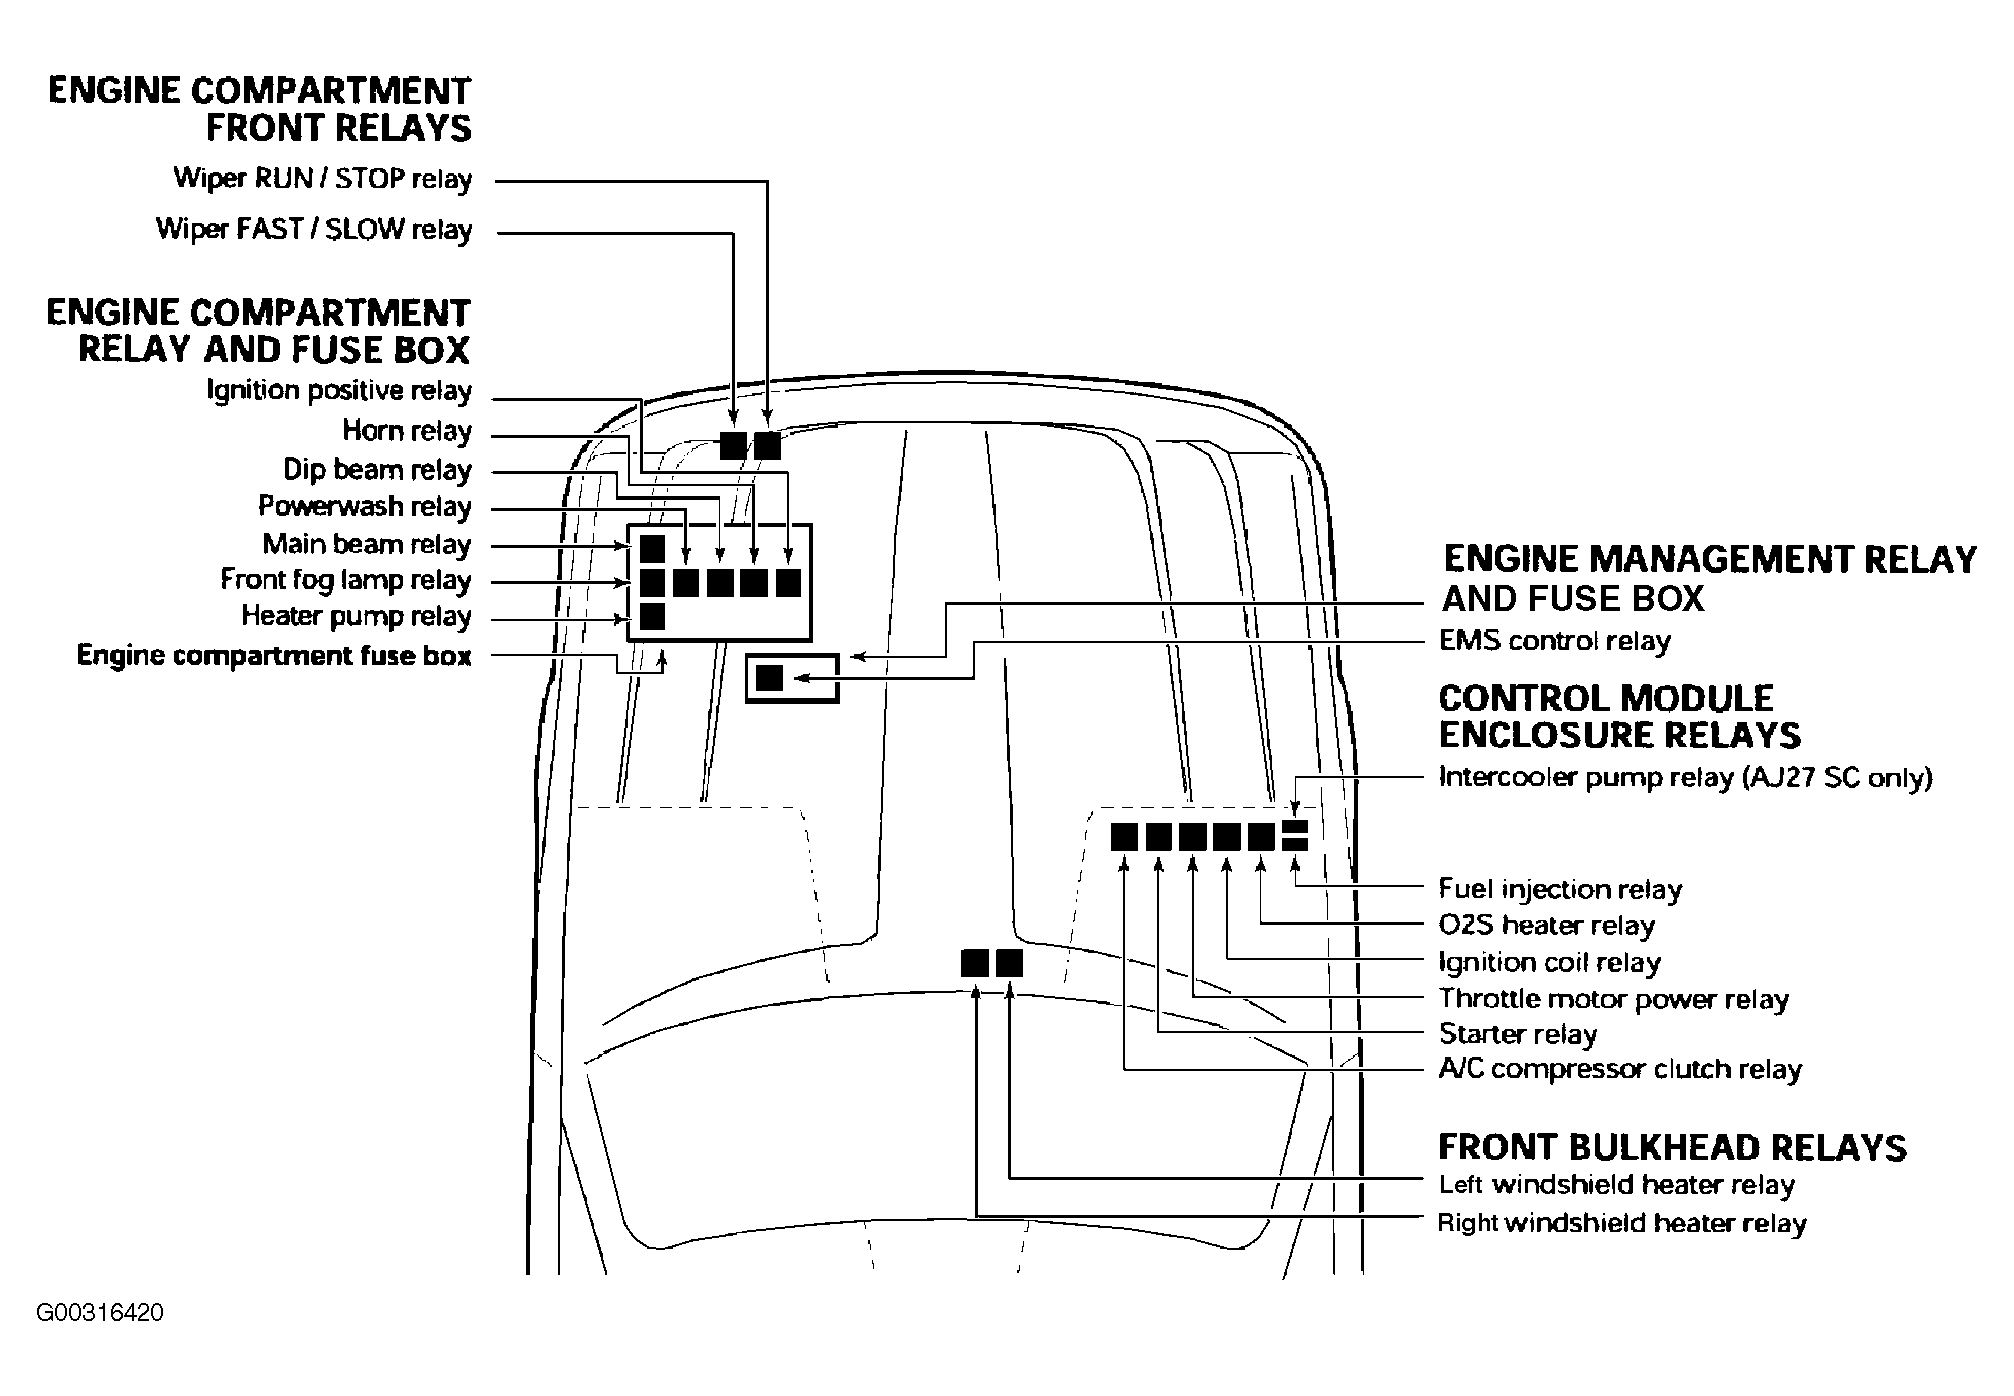 Jaguar XJ8 2000 - Component Locations -  Identifying Engine Compartment Fuse/Relay Locations